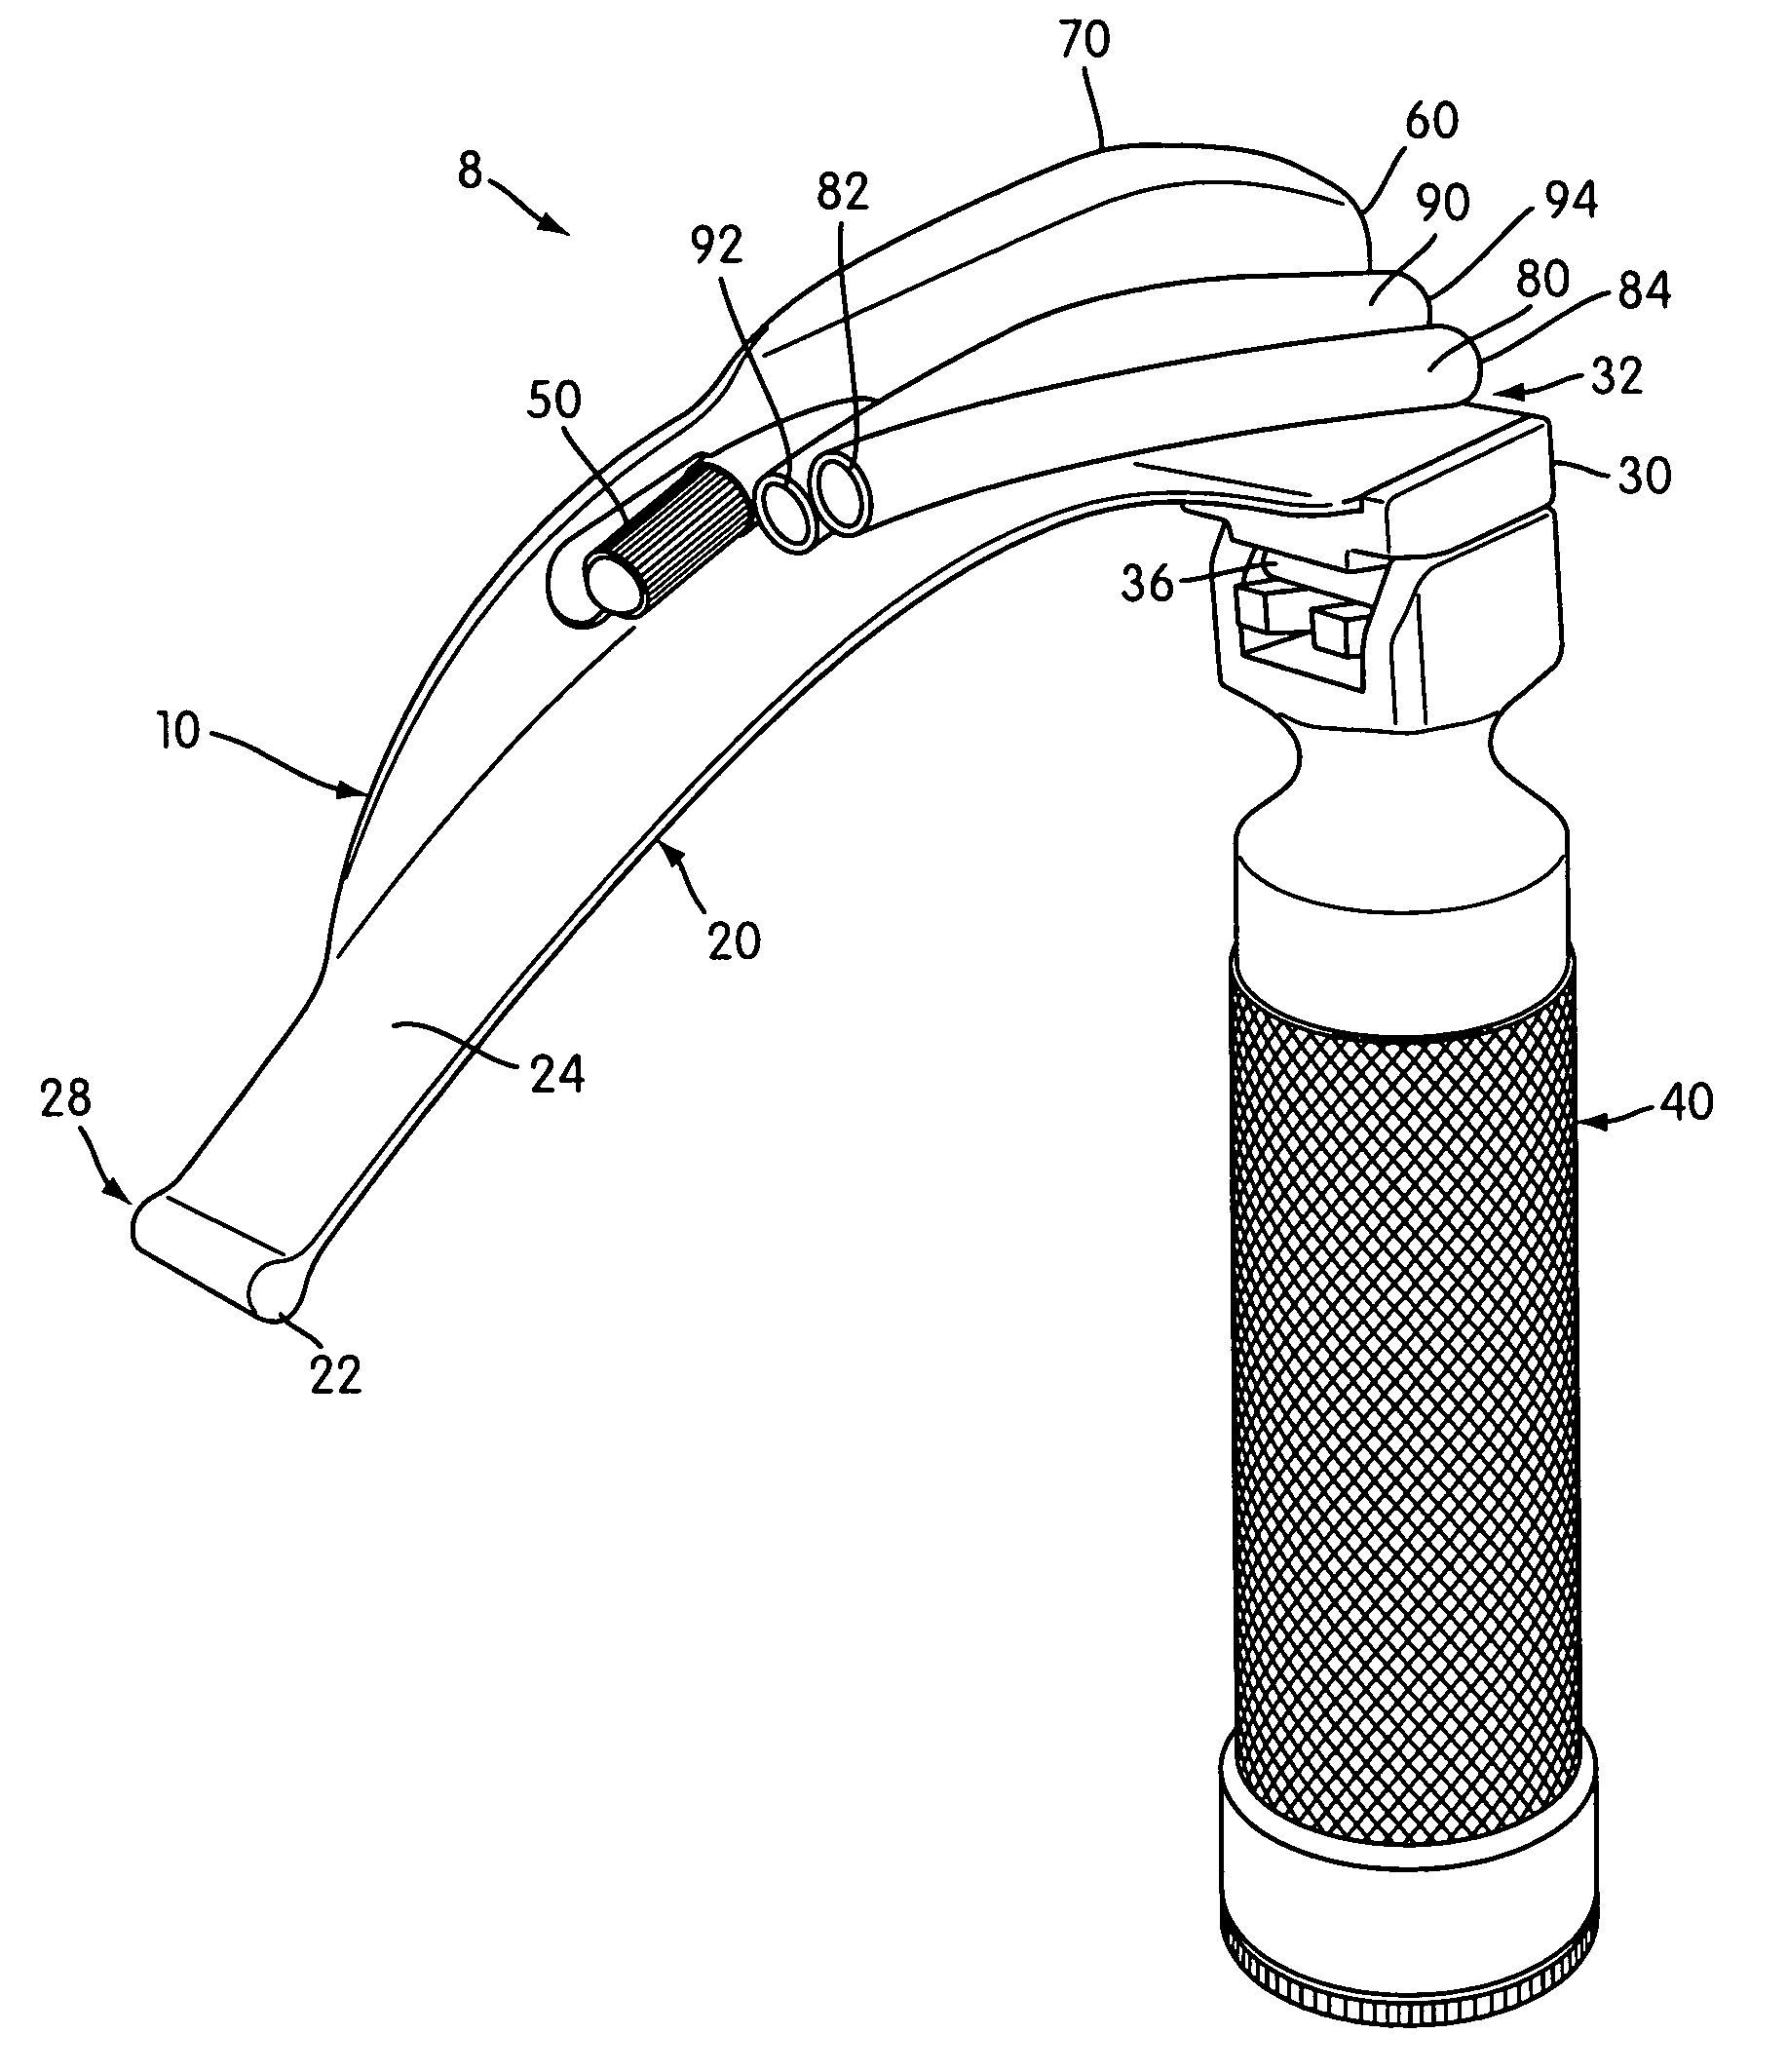 Device to aid in placing tracheal tubes